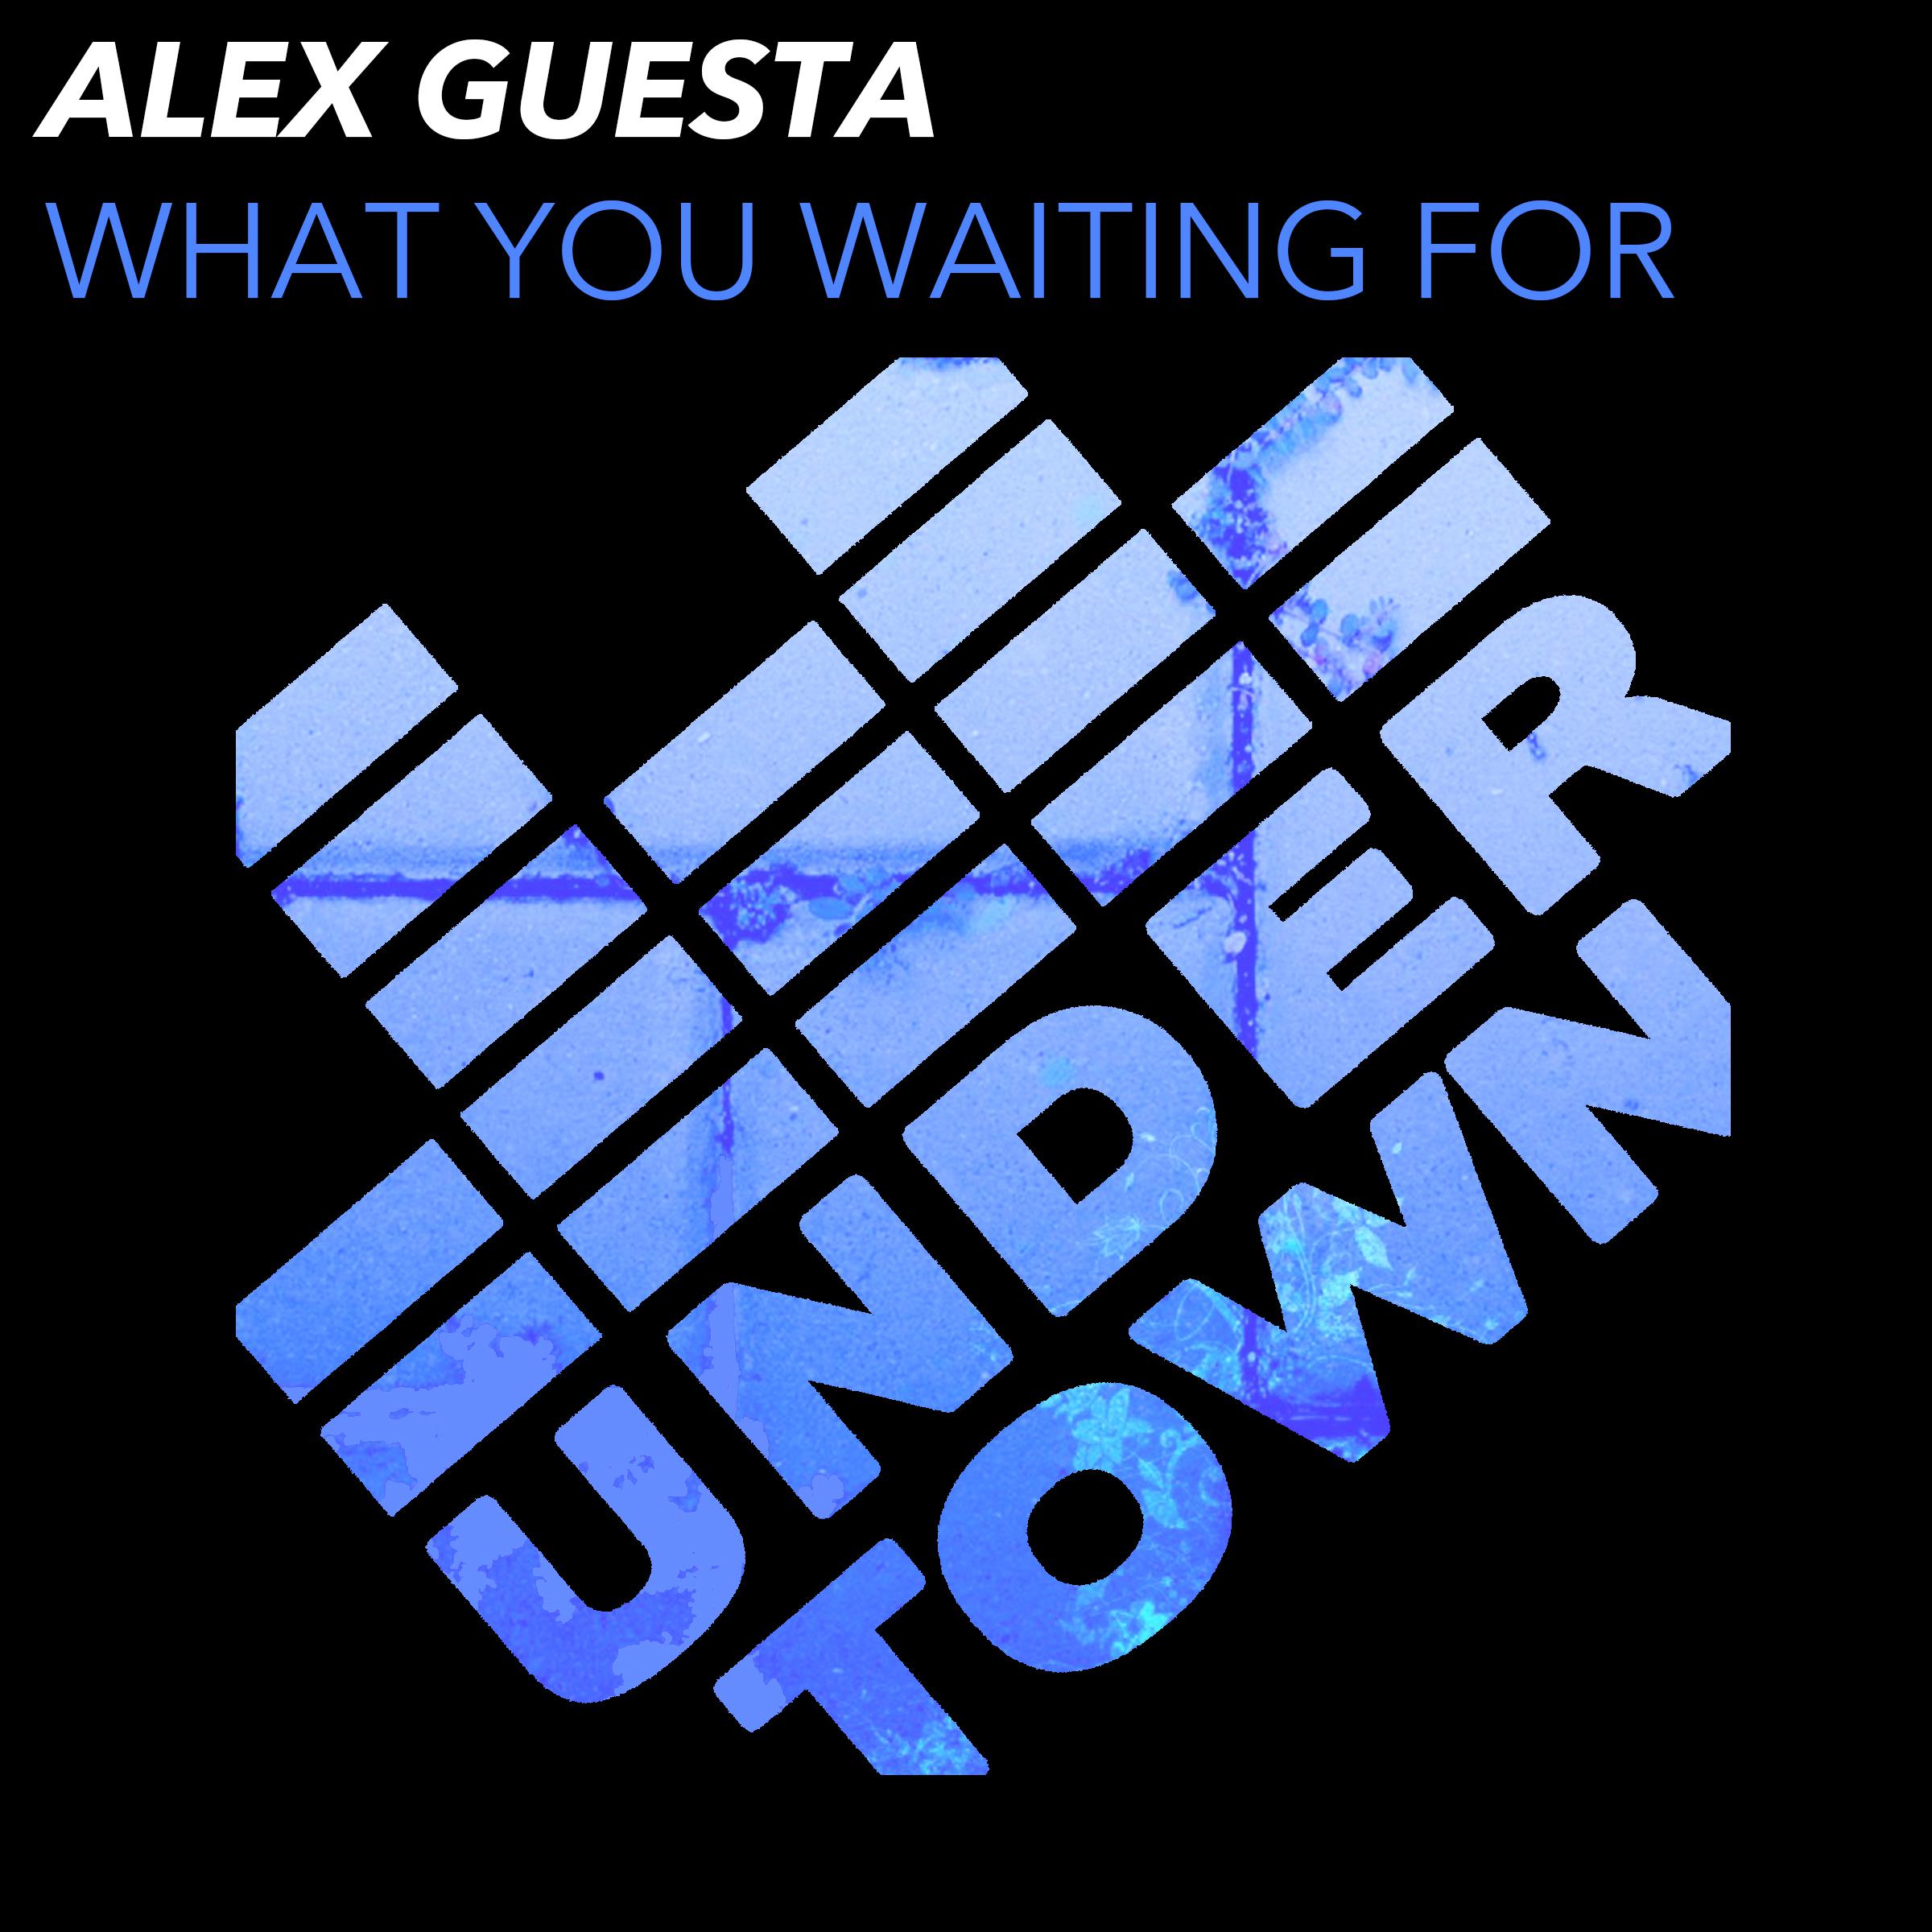 Alex Guesta - What you waiting for (Acapella)